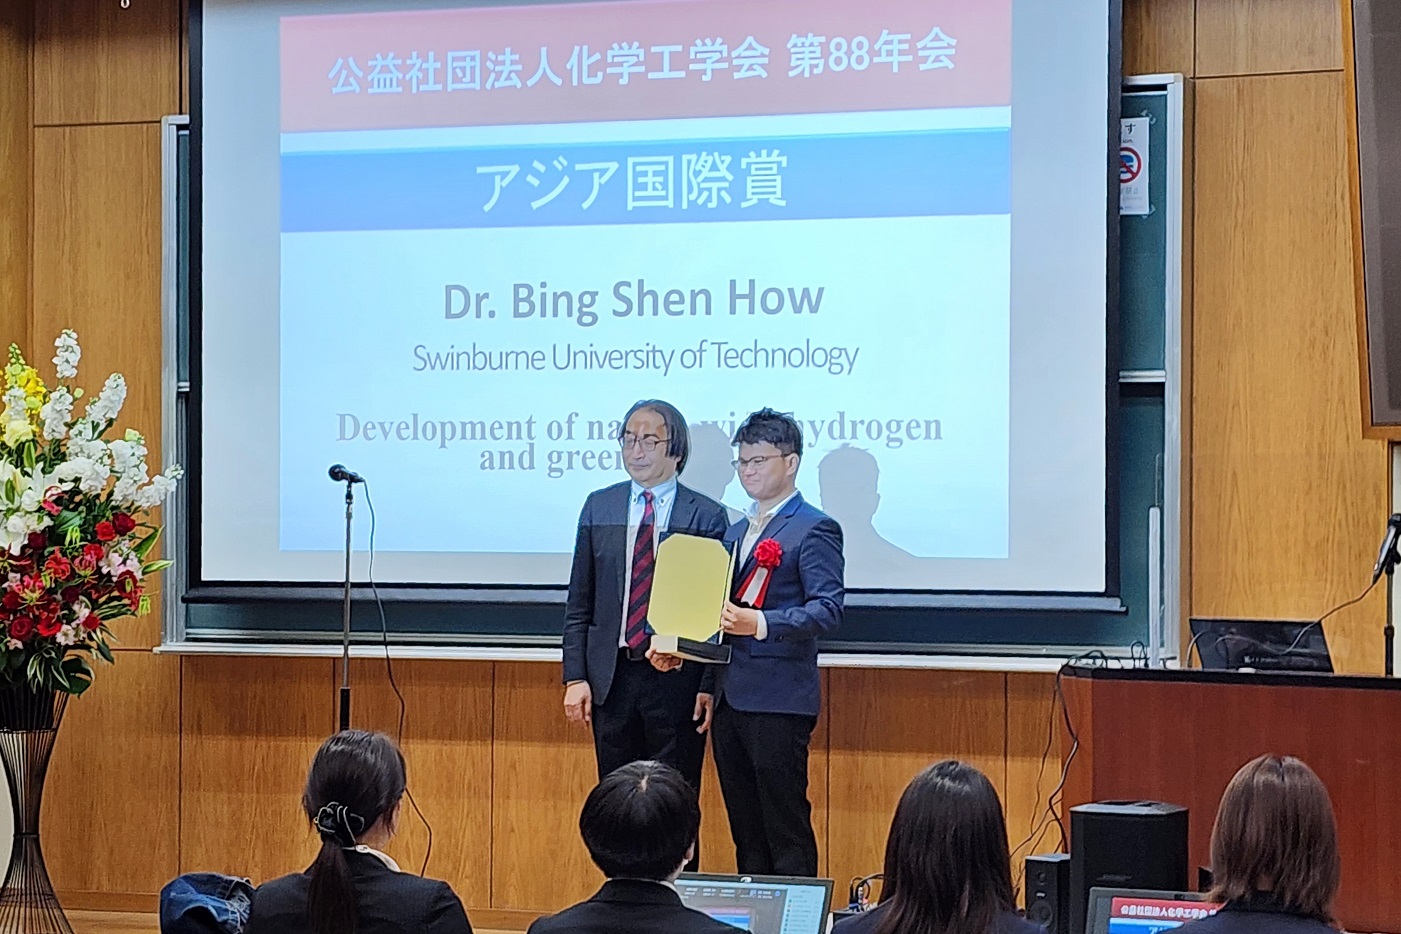 Dr How receives the SCEJ Award for Outstanding Asian Researcher and Engineer from Professor Masahiko Matsukata, Vice President of SCEJ.